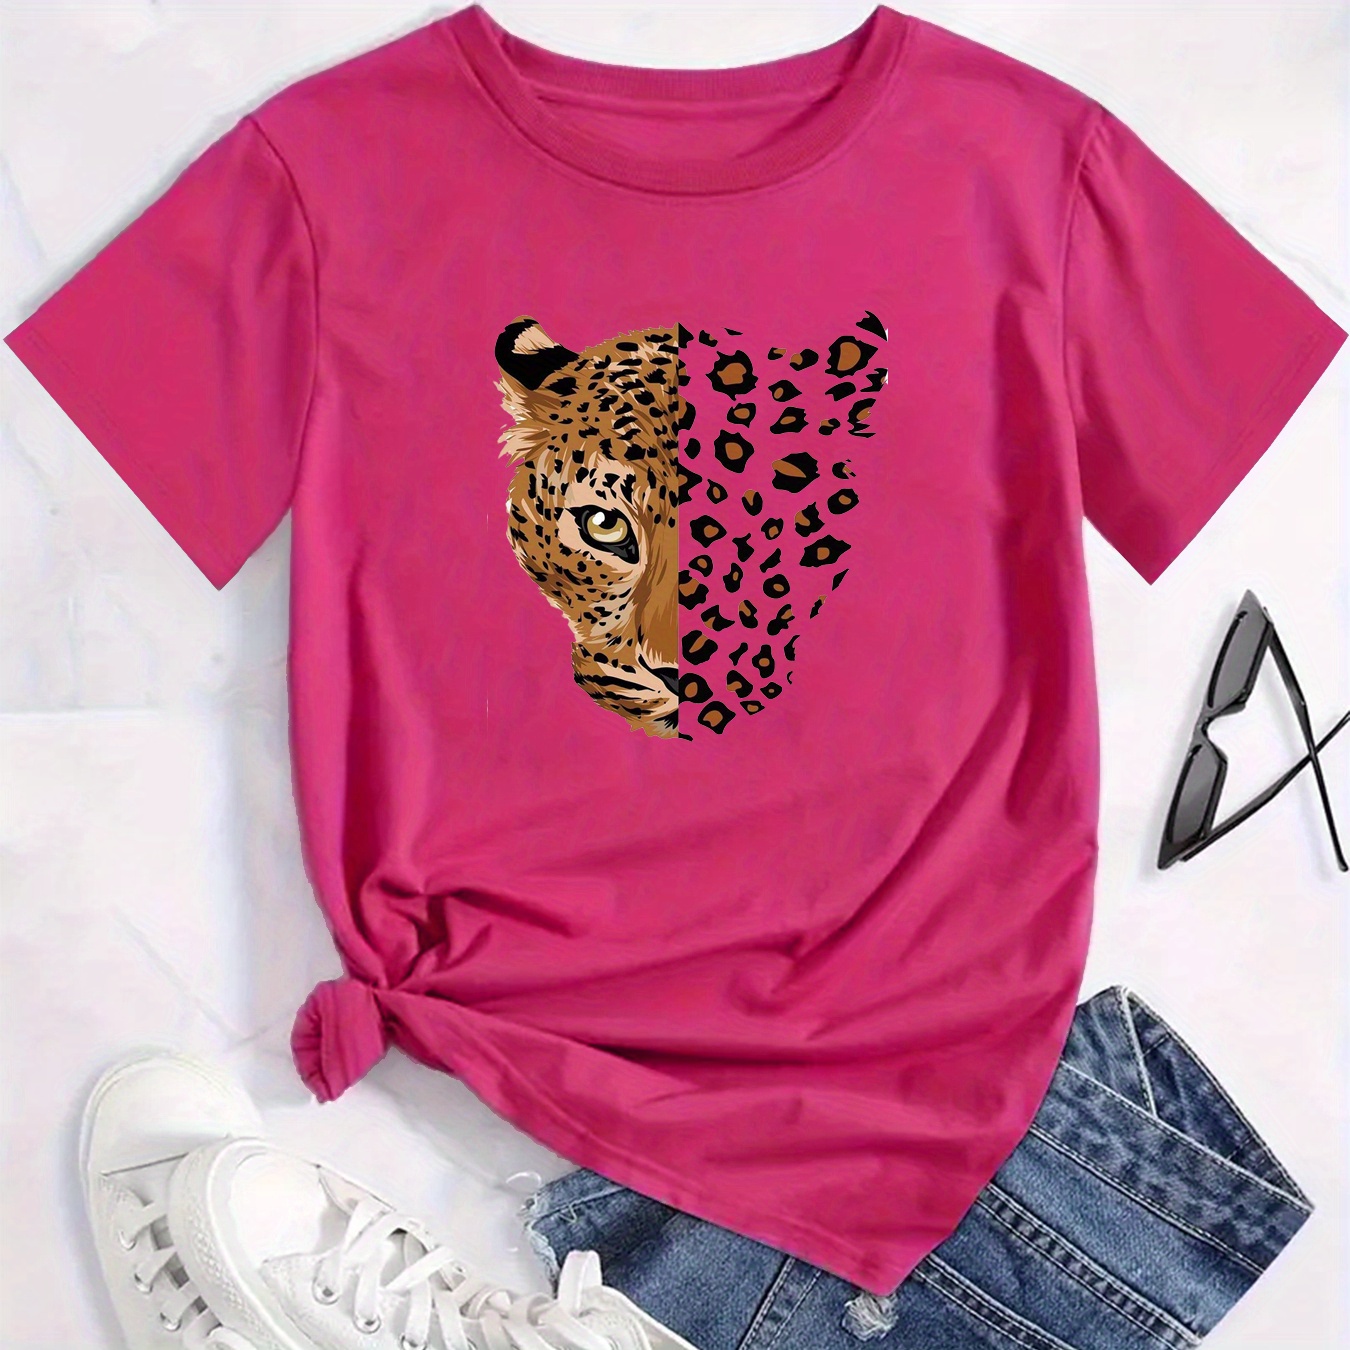 

Leopard Print T-shirt, Casual Crew Neck Short Sleeve Top For Spring & Summer, Women's Clothing